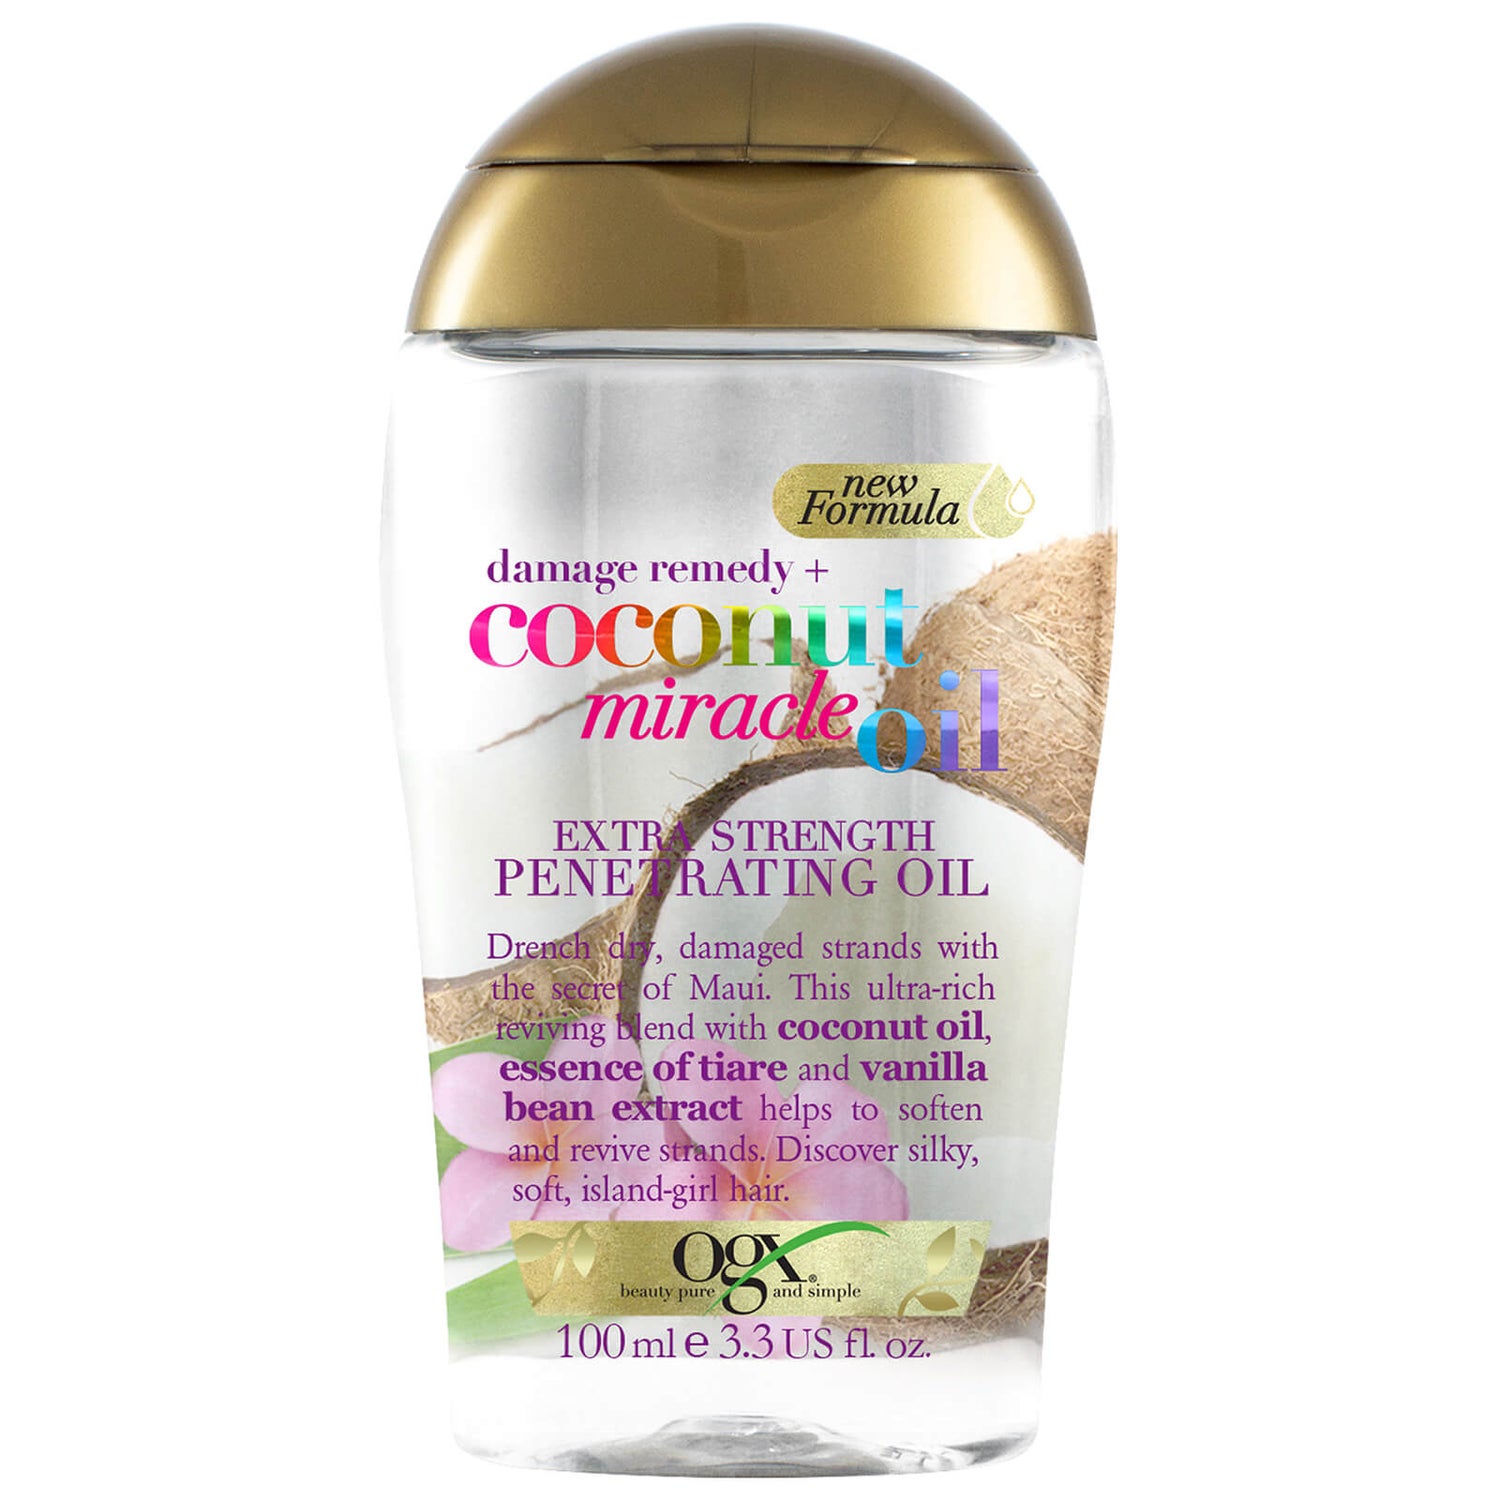 OGX Damage Remedy+ Coconut Miracle Oil Extra Strength Penetrating Oil 100ml